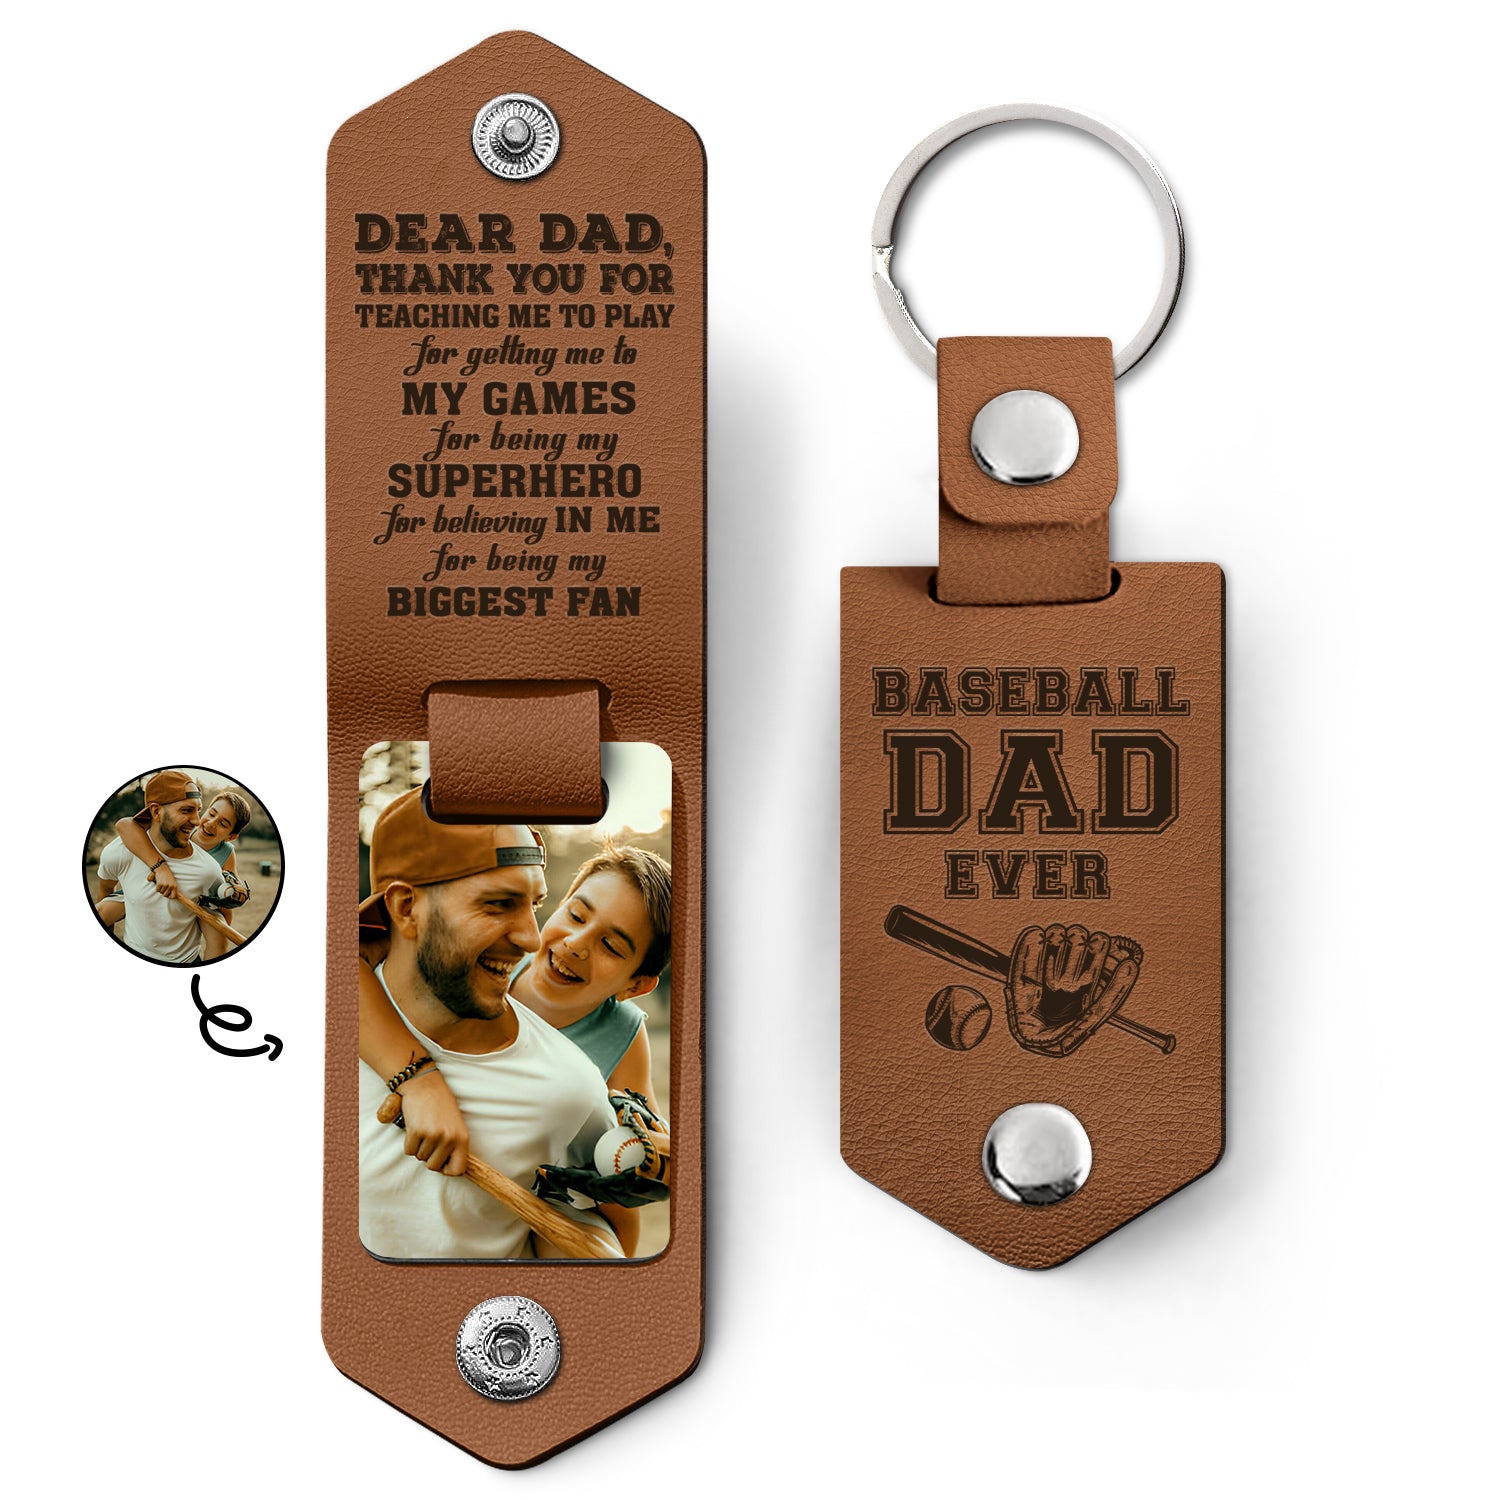 Custom Photo Dear Dad Thank You For Teaching Me - Birthday, Loving Gift For Baseball, Softball Father - Personalized Leather Photo Keychain